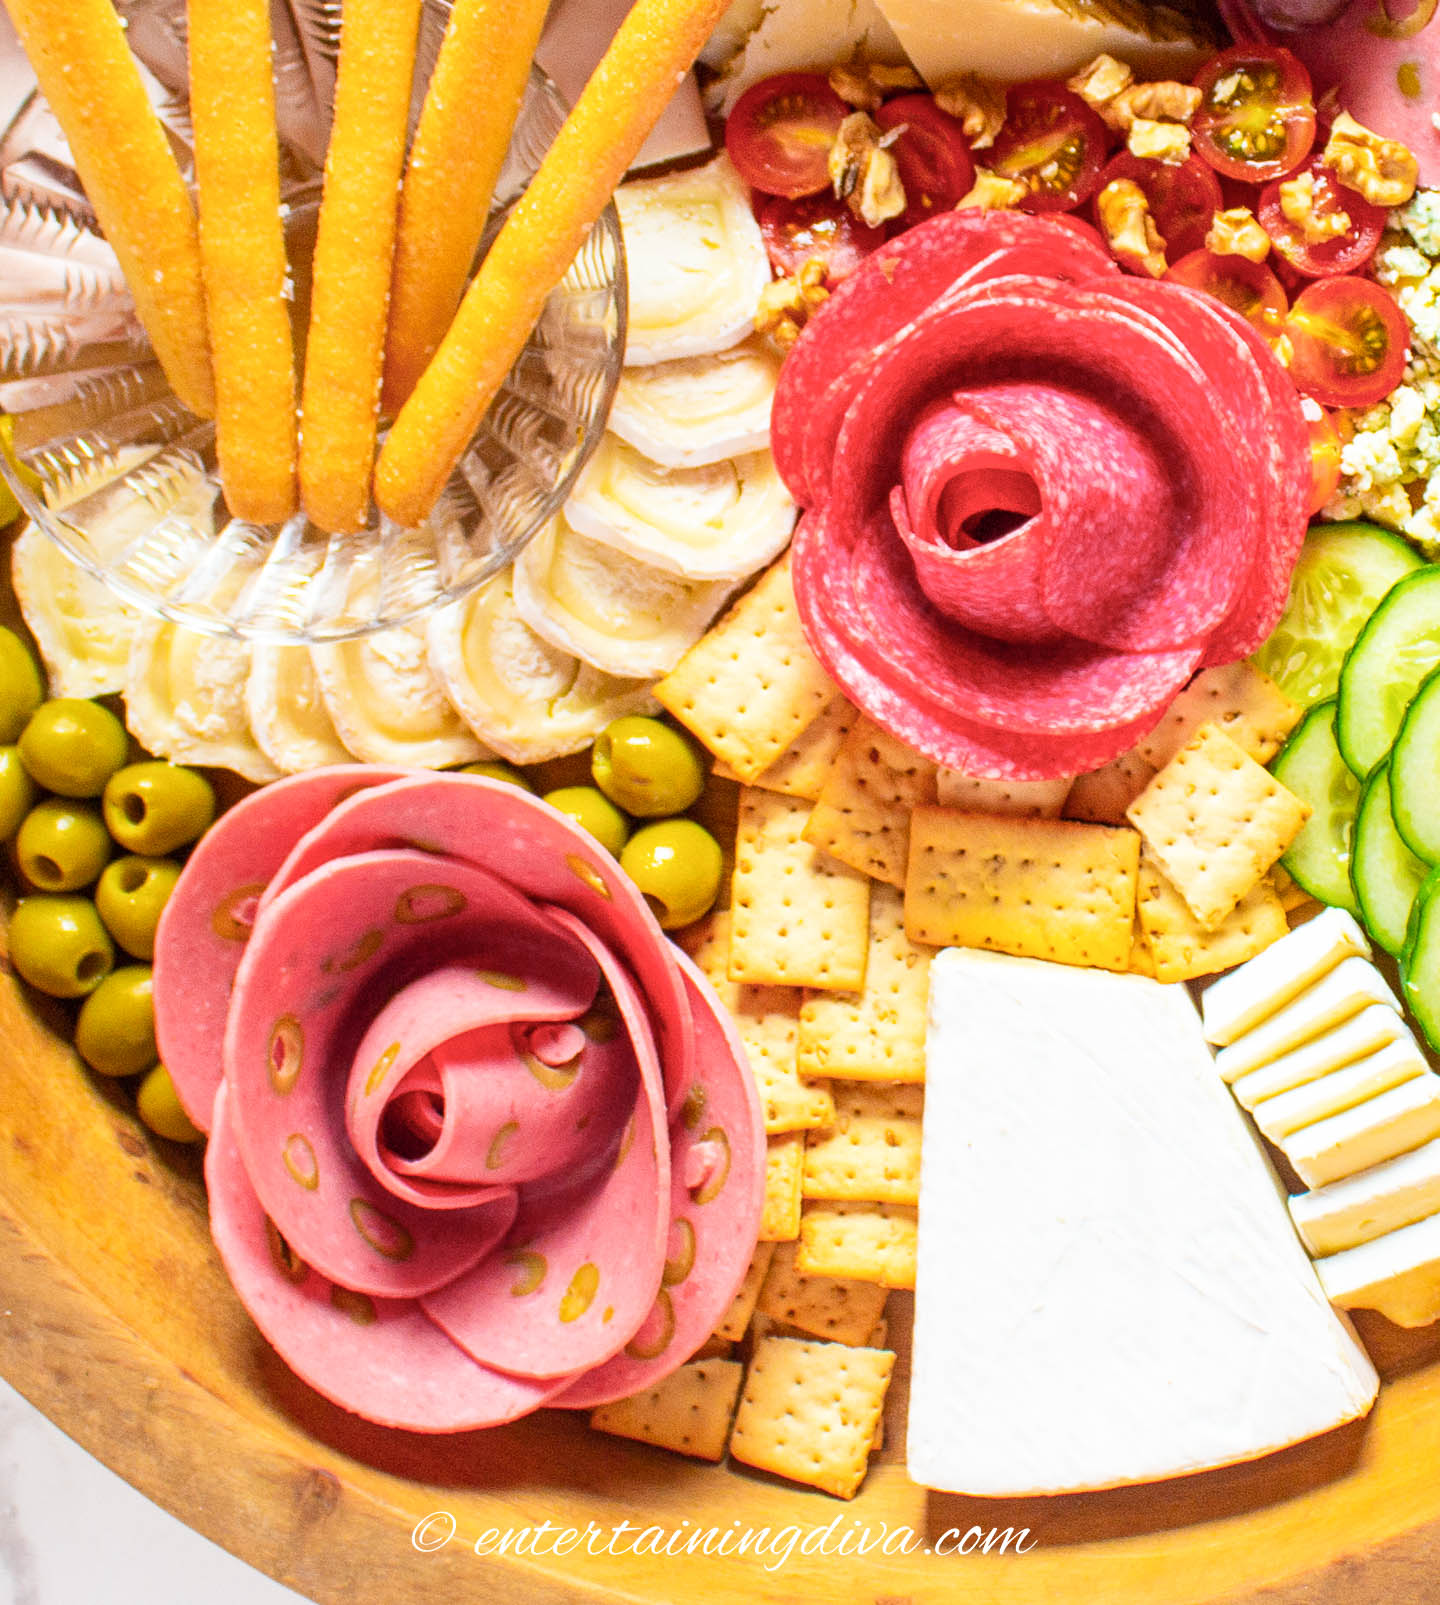 Meats made into flowers on a charcuterie board with crackers, olives and cheeses